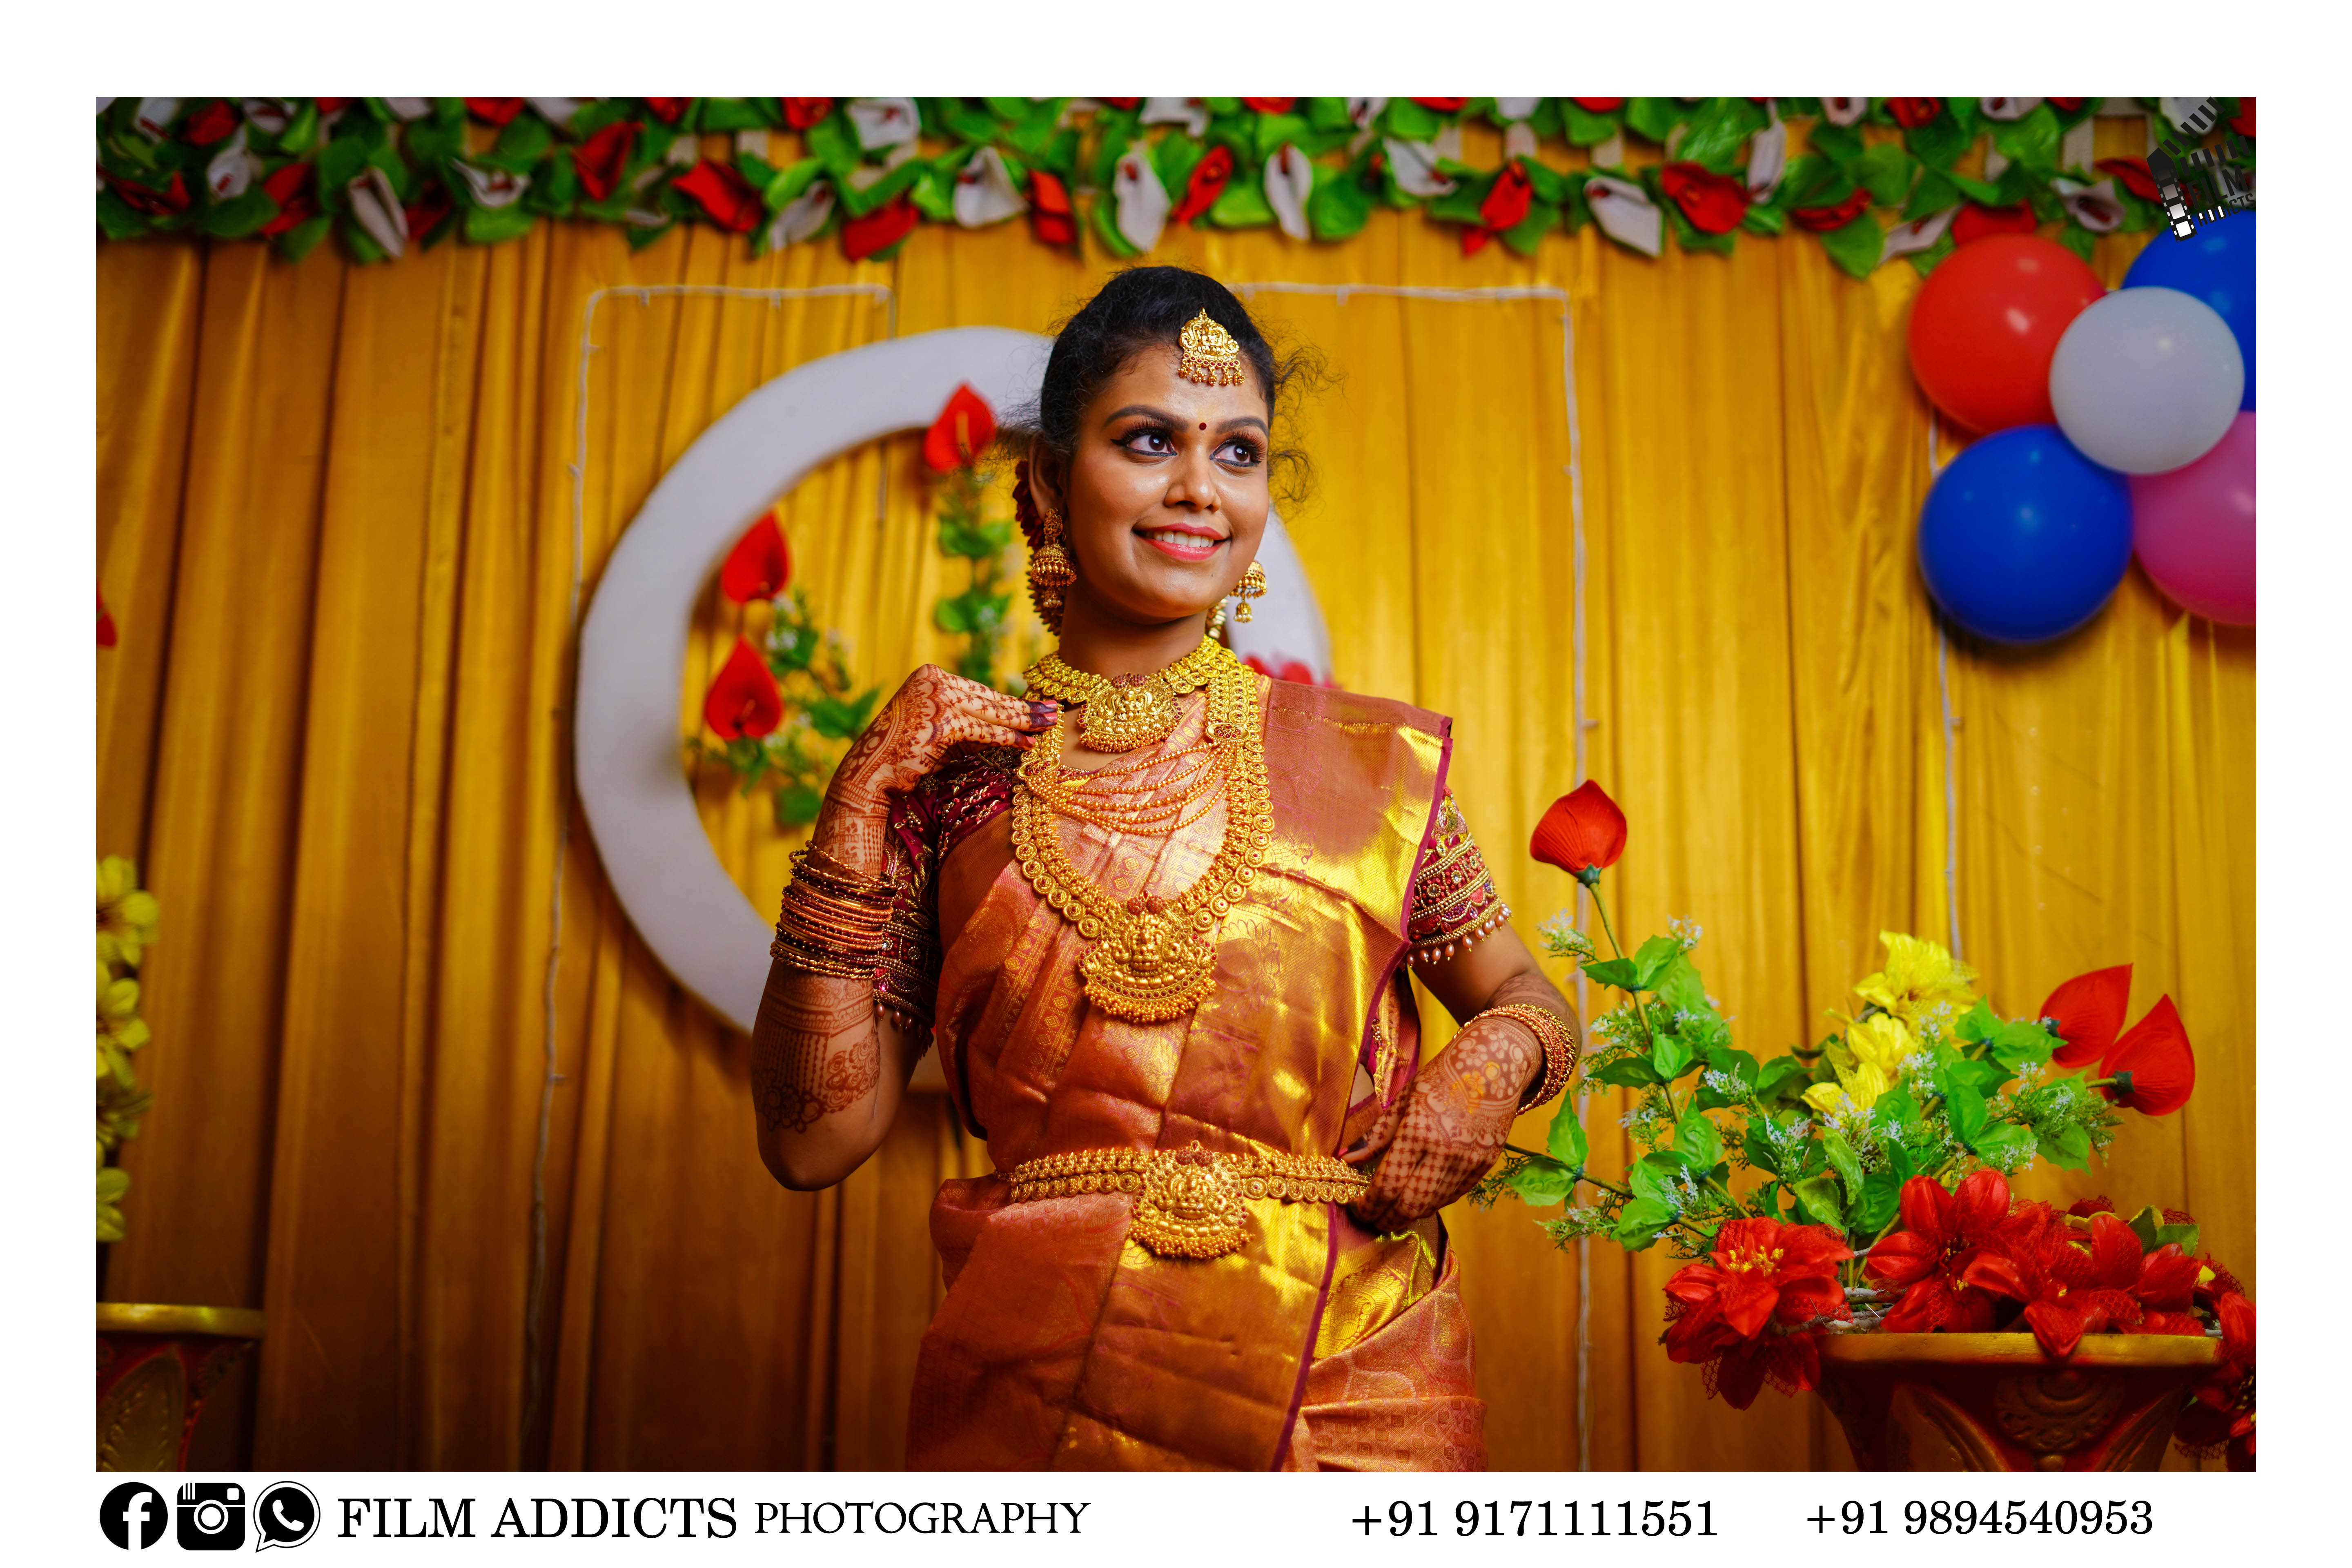 Best Puberty Photography in Virudhunagar-FilmAddicts Photography,Best Wedding Photographers in Virudhunagar, Best candid photographers in Virudhunagar, Best Wedding Candid photographers in Virudhunagar, Wedding Candid Moments, FilmAddicts, Photography, FilmAddictsPhotography, best wedding in Virudhunagar, Best Candid shoot in Virudhunagar, best moment, Best wedding moments, Best wedding photography in Virudhunagar, Best wedding videography in Virudhunagar, Best couple shoot, Best candid, Best wedding shoot, Best wedding candid, best marraige photographers in Virudhunagar, best marraige photography in Virudhunagar, best candid photography, best Virudhunagar photography, Virudhunagar, Virudhunagar photography, Virudhunagar couples, candid shoot, candid, tamilnadu wedding photography, best photographers in Virudhunagar, tamilnadu